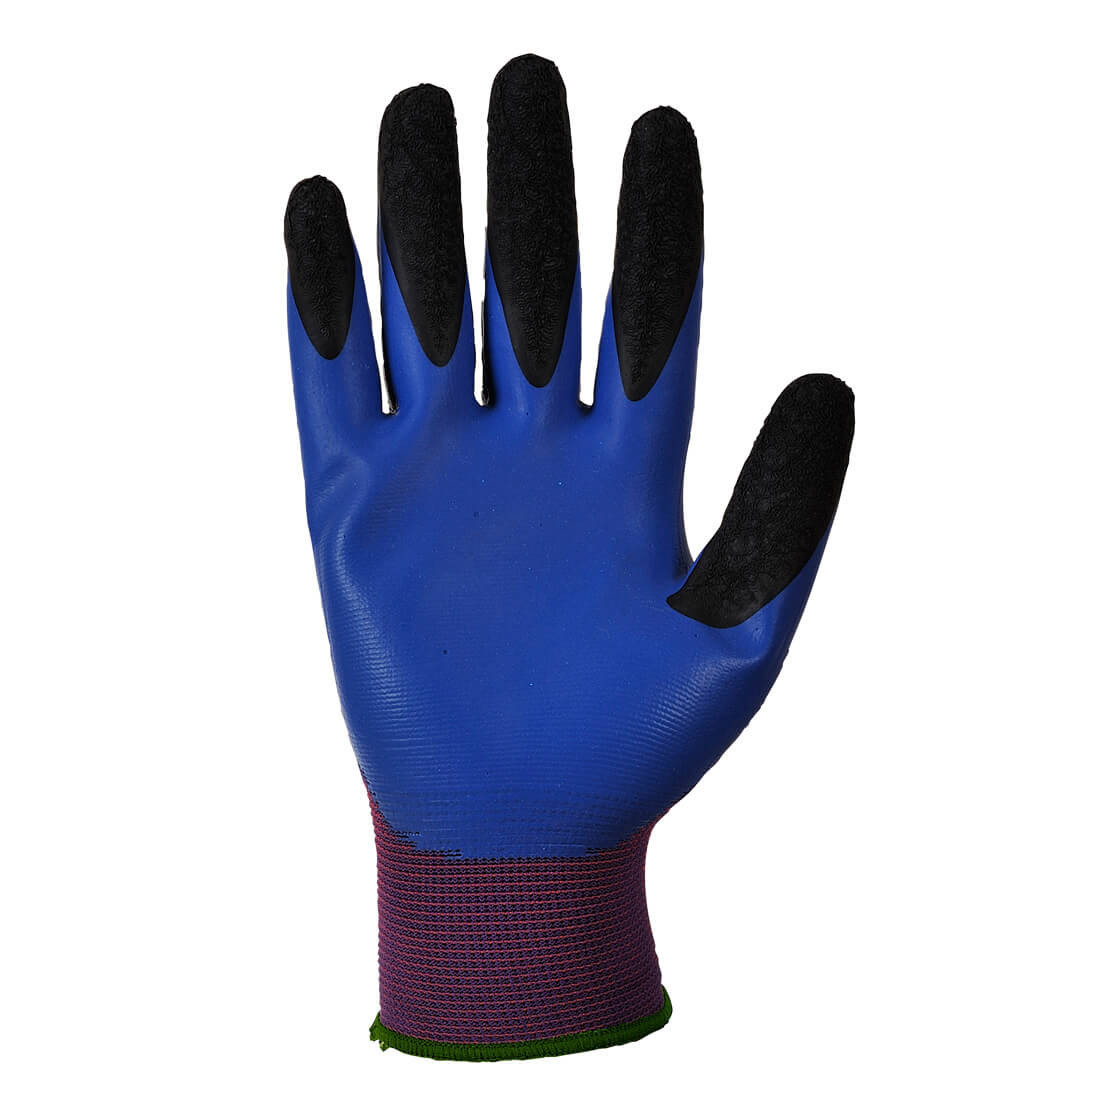 Duo-Flex glove - Personal protection